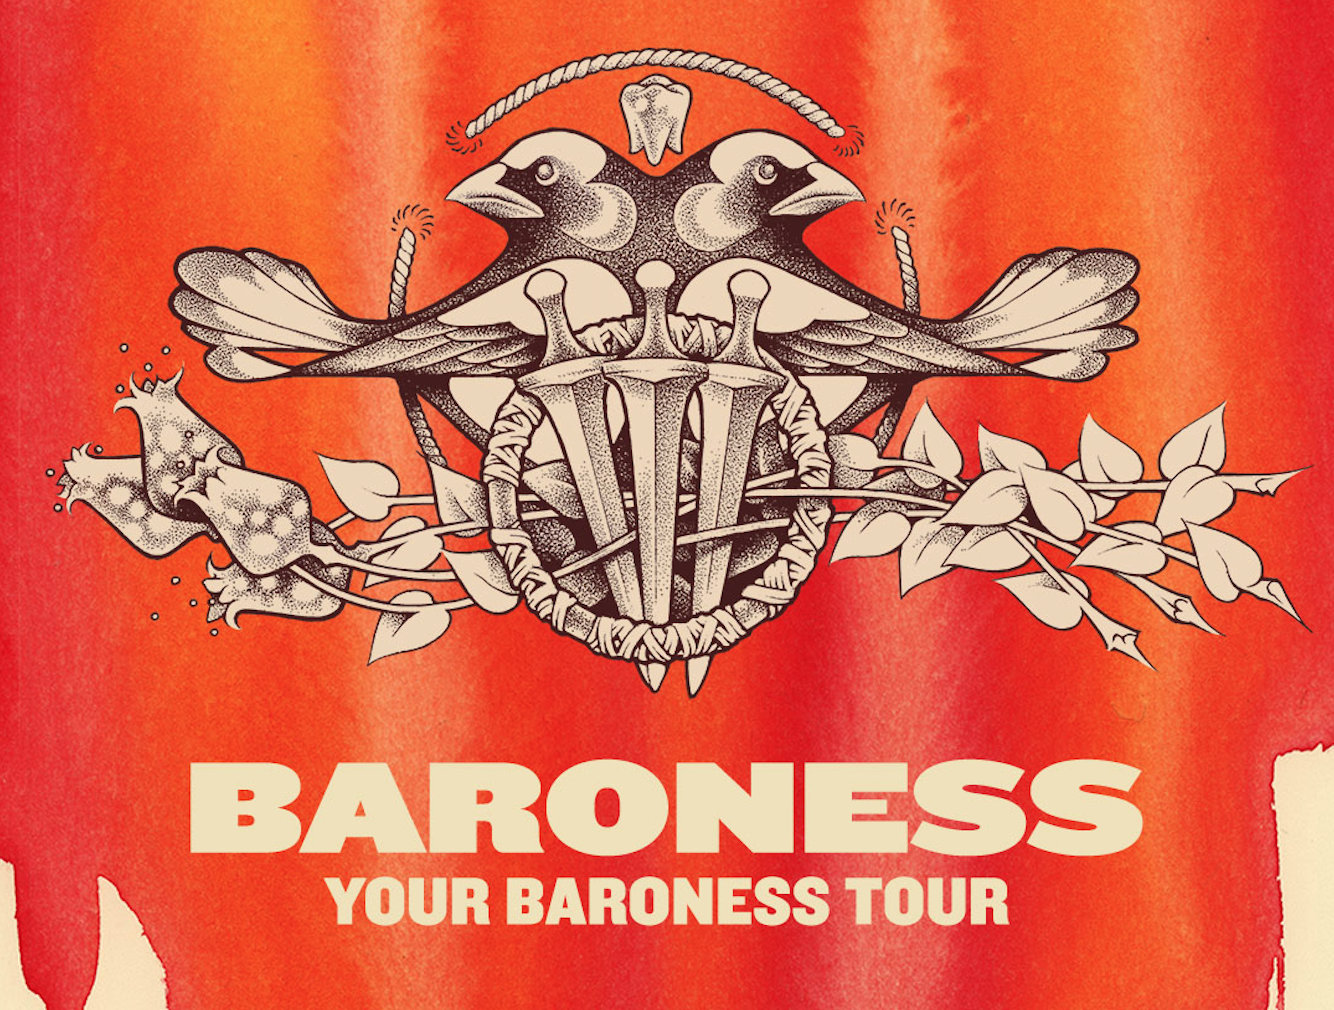 Your Baroness Tour Announced This Fall in the U.S.